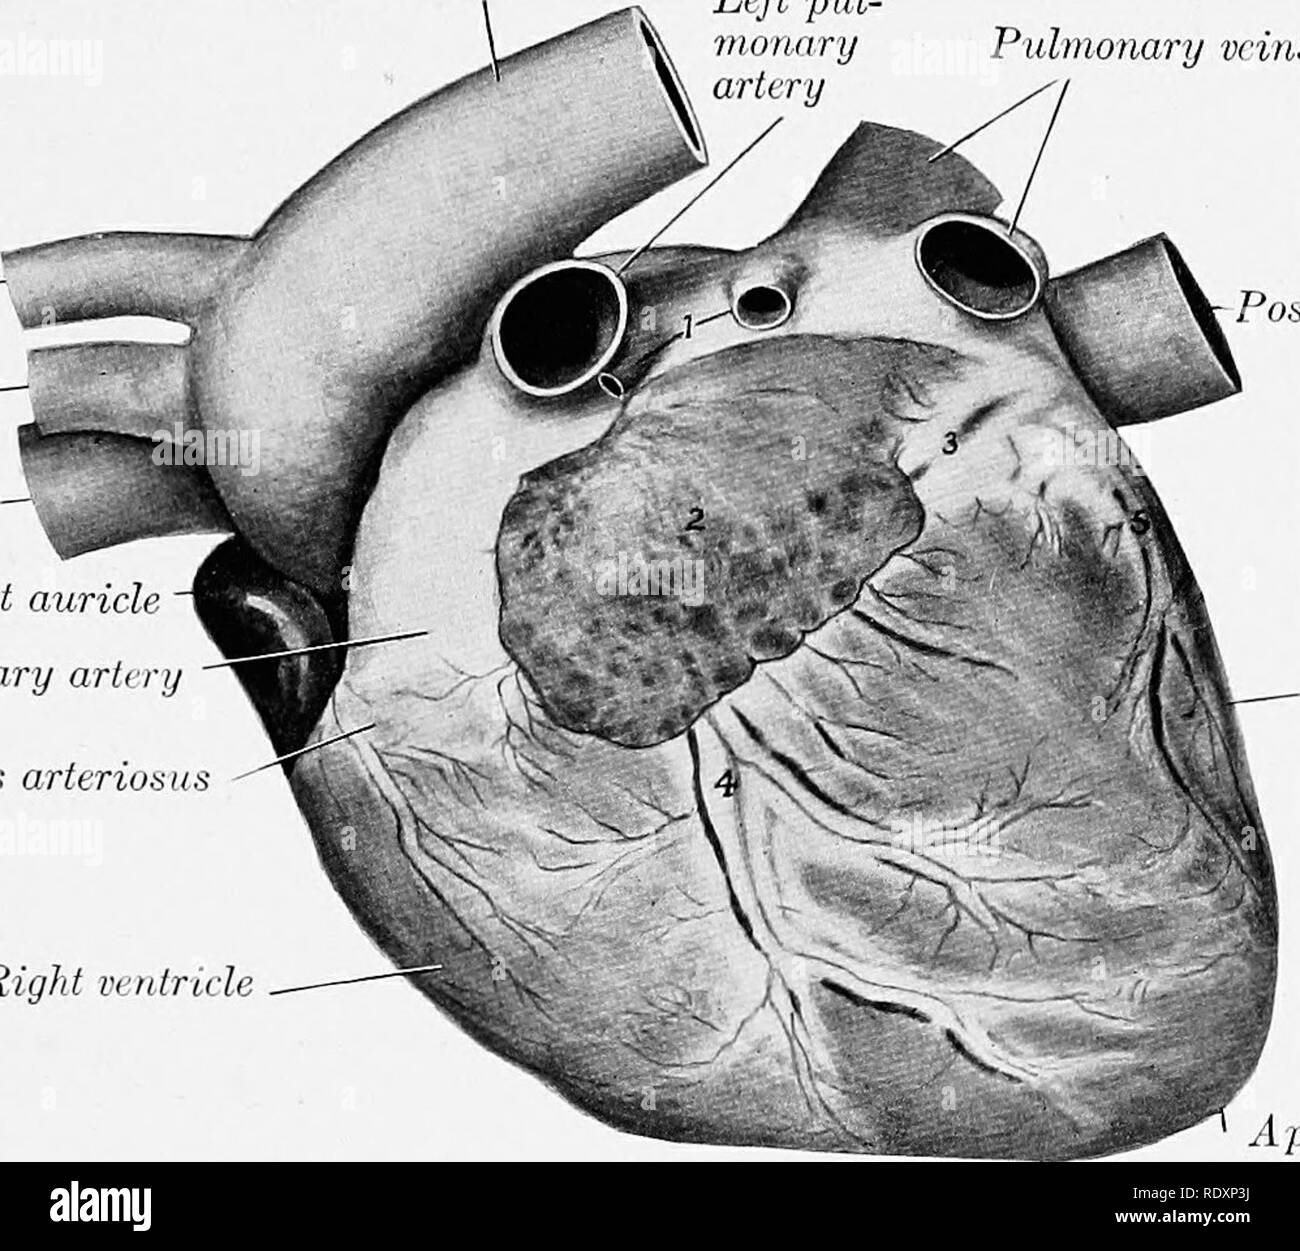 . The anatomy of the domestic animals . Veterinary anatomy. THE PEEICABDIXJM AND HEART 743 wUi, ^^ °'l^'' ?^ contact of the pericardium with the chest wall is chiefly ventral, and is best seen muscles) TheT,l^'^,'tpH?f'k ^&quot;, ^^is position (after removal of the mtercostal and rectus thorac^ muscles) the aiea is seen to be a.lmost triangular. The anterior border of the triangle (formed by Xe&quot;^ e^d no'nf ttfthfw ^&quot;^^ f ^^.^&quot;^ &quot;^^^ fourth costal cartilage and extends across the median plane endmg at the third interchondral space near the costo-chondral junction. The right  Stock Photo